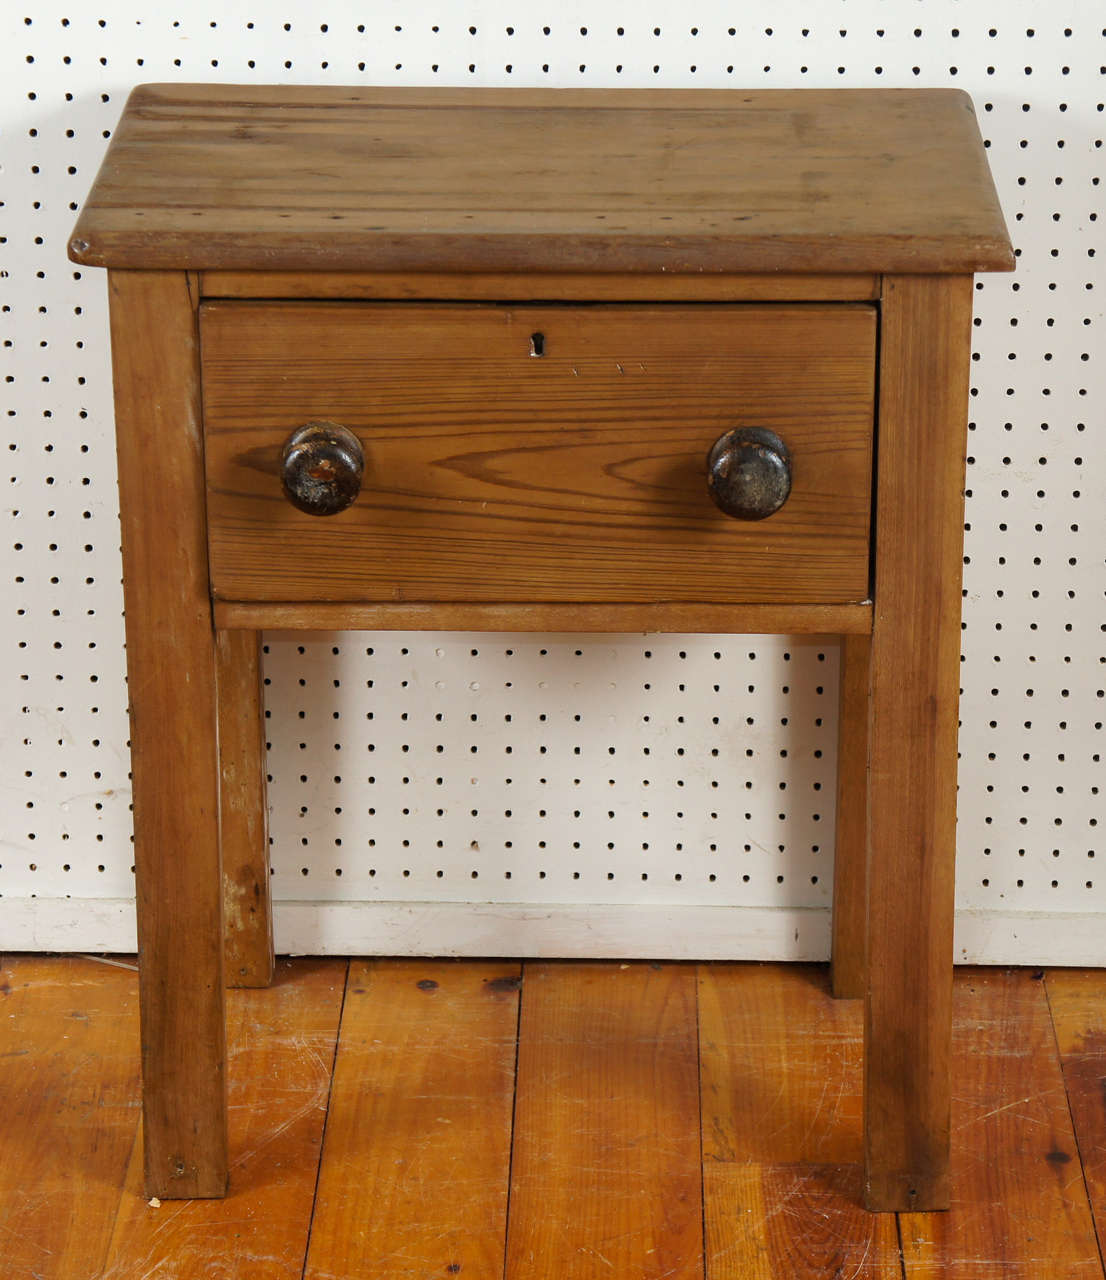 This sweet table would work either as an nightstand or a side table. One nice sized drawer with two brown knobs will hold anything you can think of for such a small table. Nice patina. A real country table.